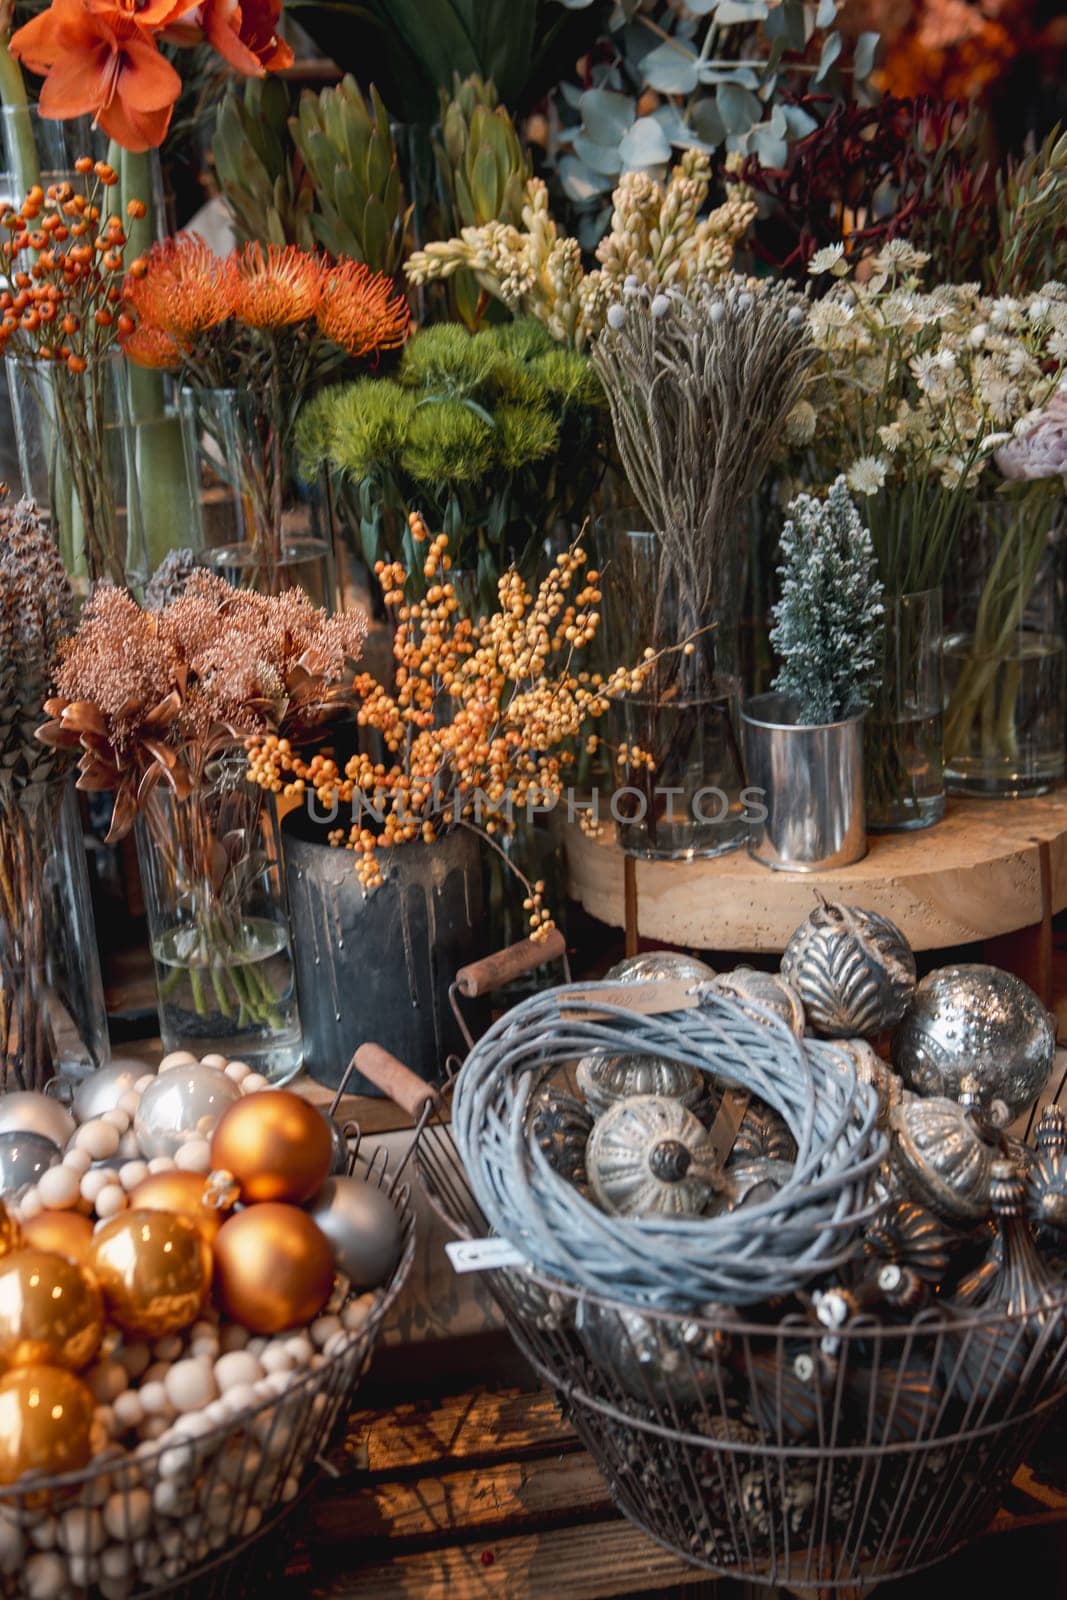 Gorgeous Christmas decor arranged on the store's display counter. High quality photo